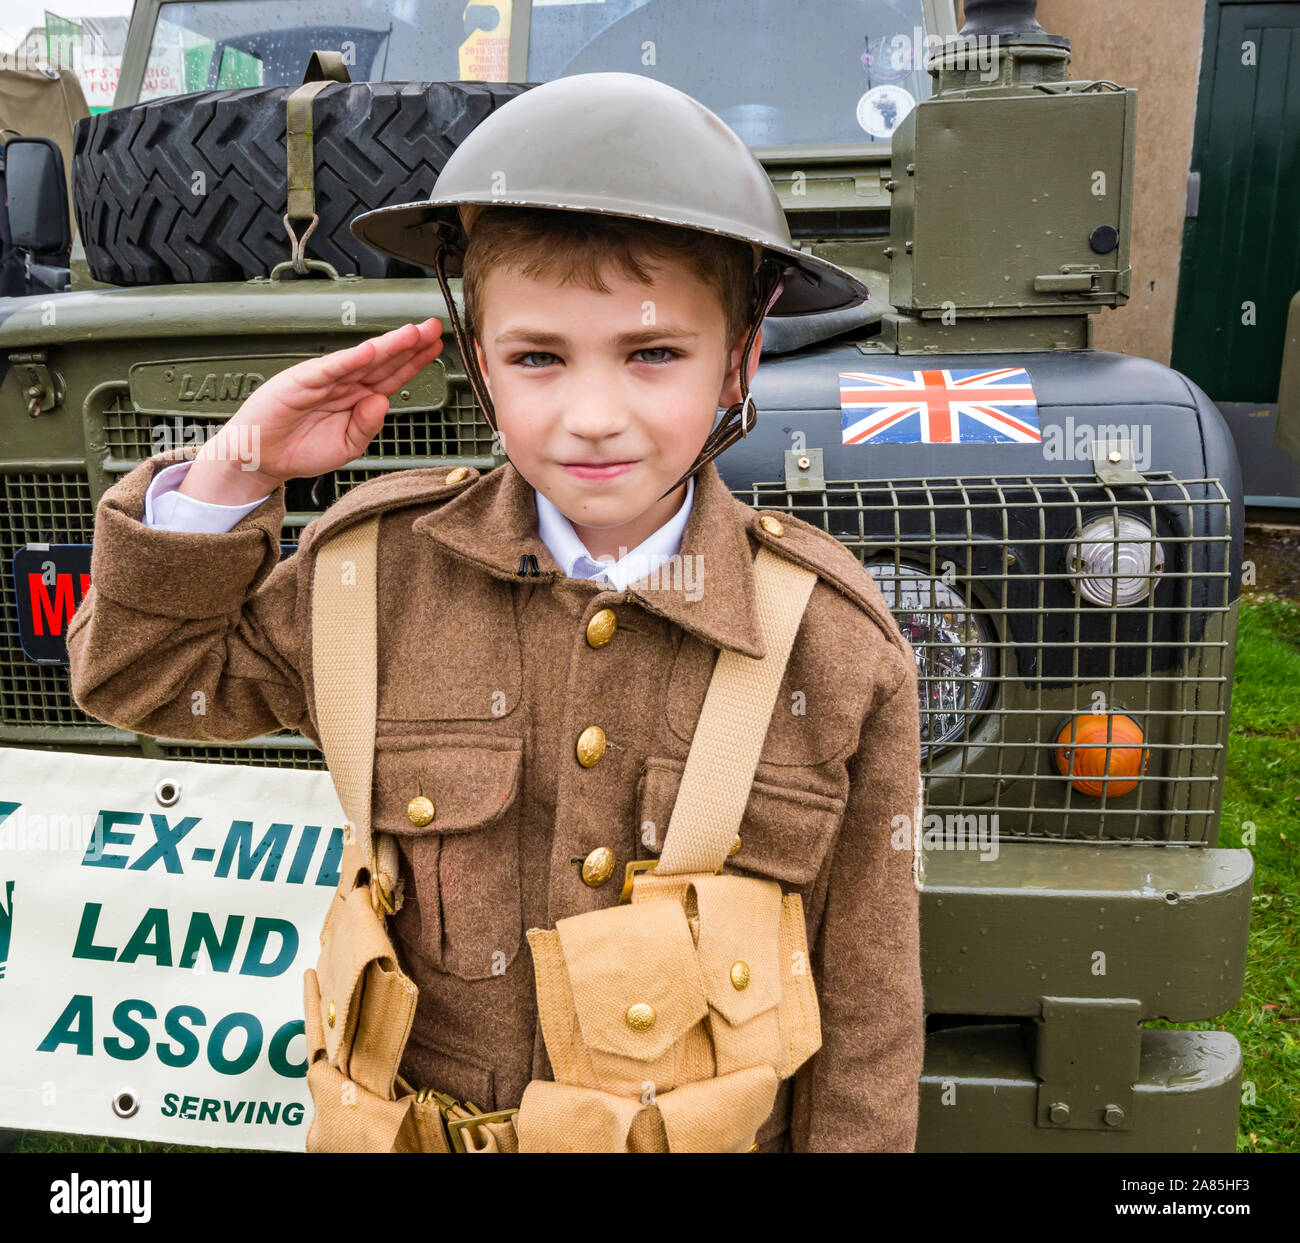 National airshow, East Fortune, East Lothian, Scotland, UK. Harrison aged 8 years in World War I soldier's army uniform makes a salute Stock Photo